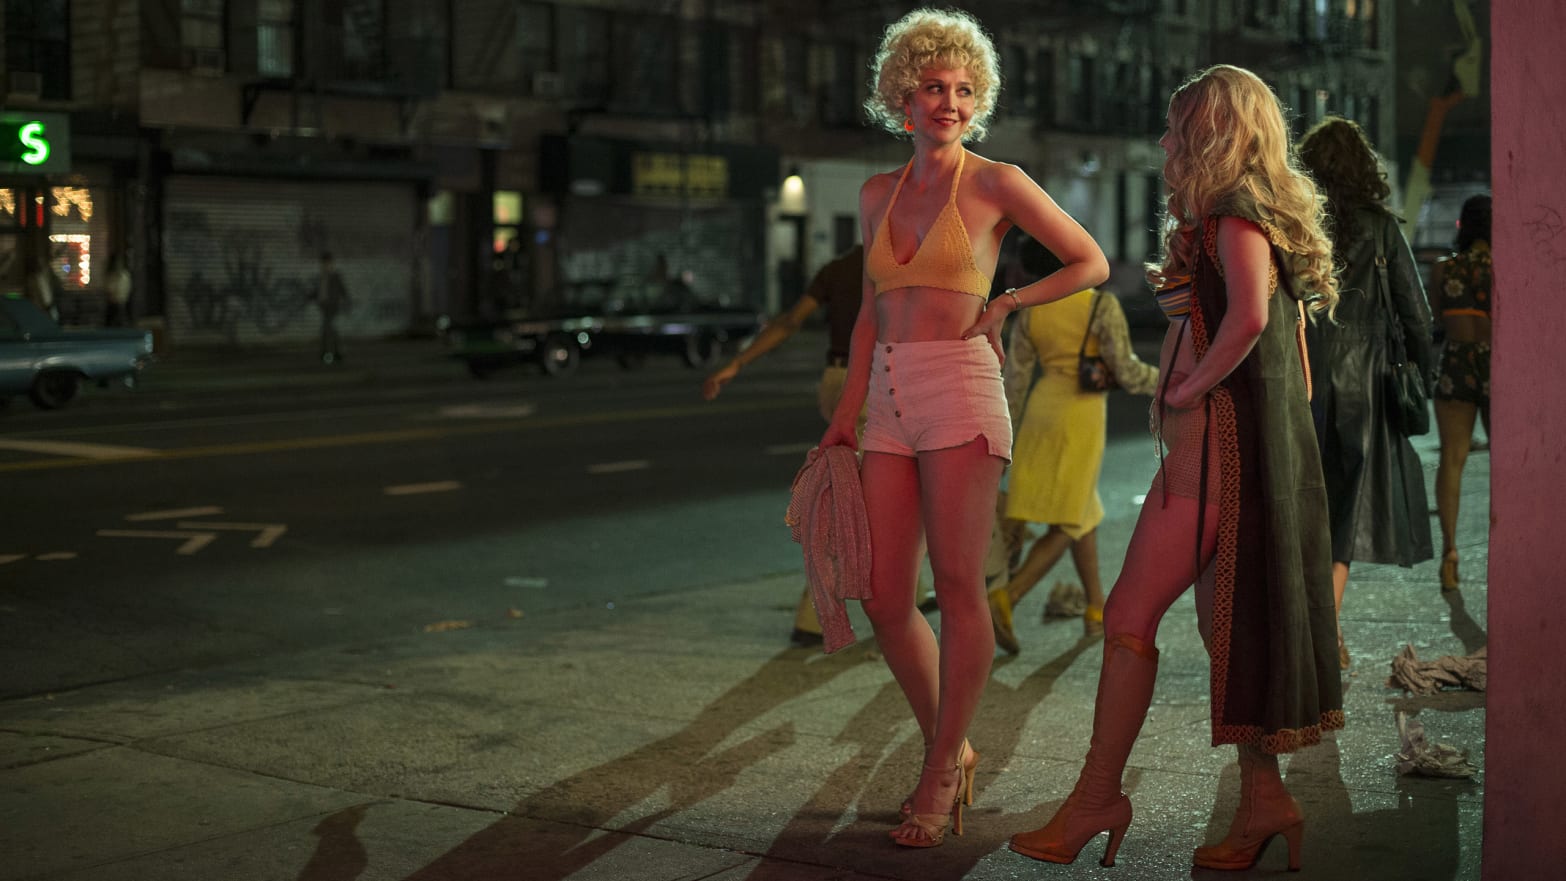 1970s Stockings Porn - HBO's New '70s Porn Drama 'The Deuce' Casts a Female Gaze on Sex